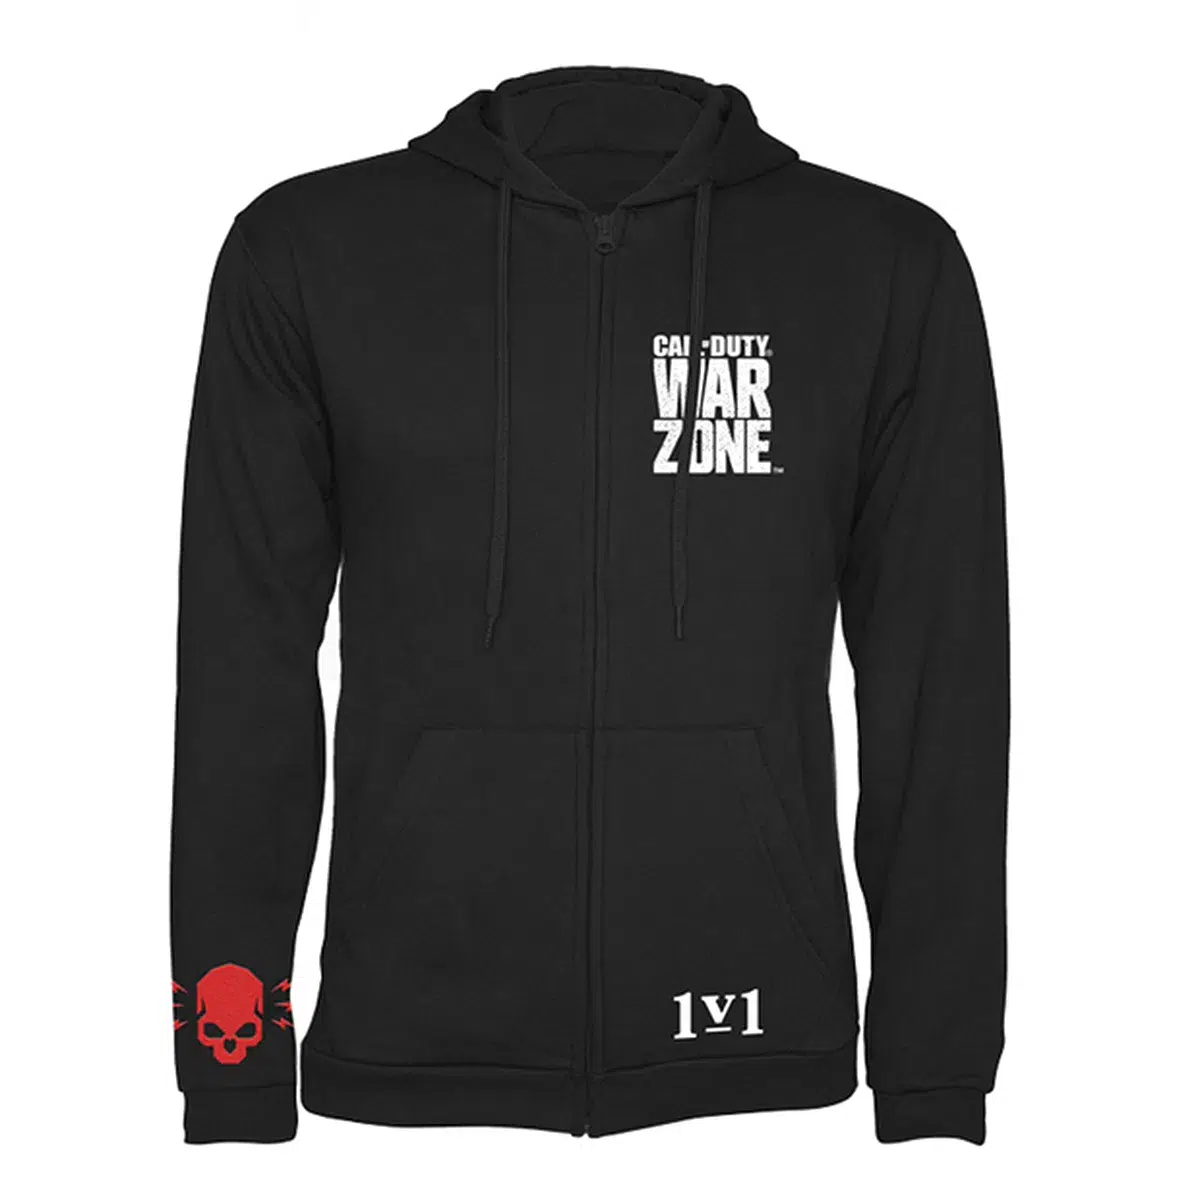 Call of Duty: Warzone Zipper Hoodie "Winner Takes All" Black L Cover